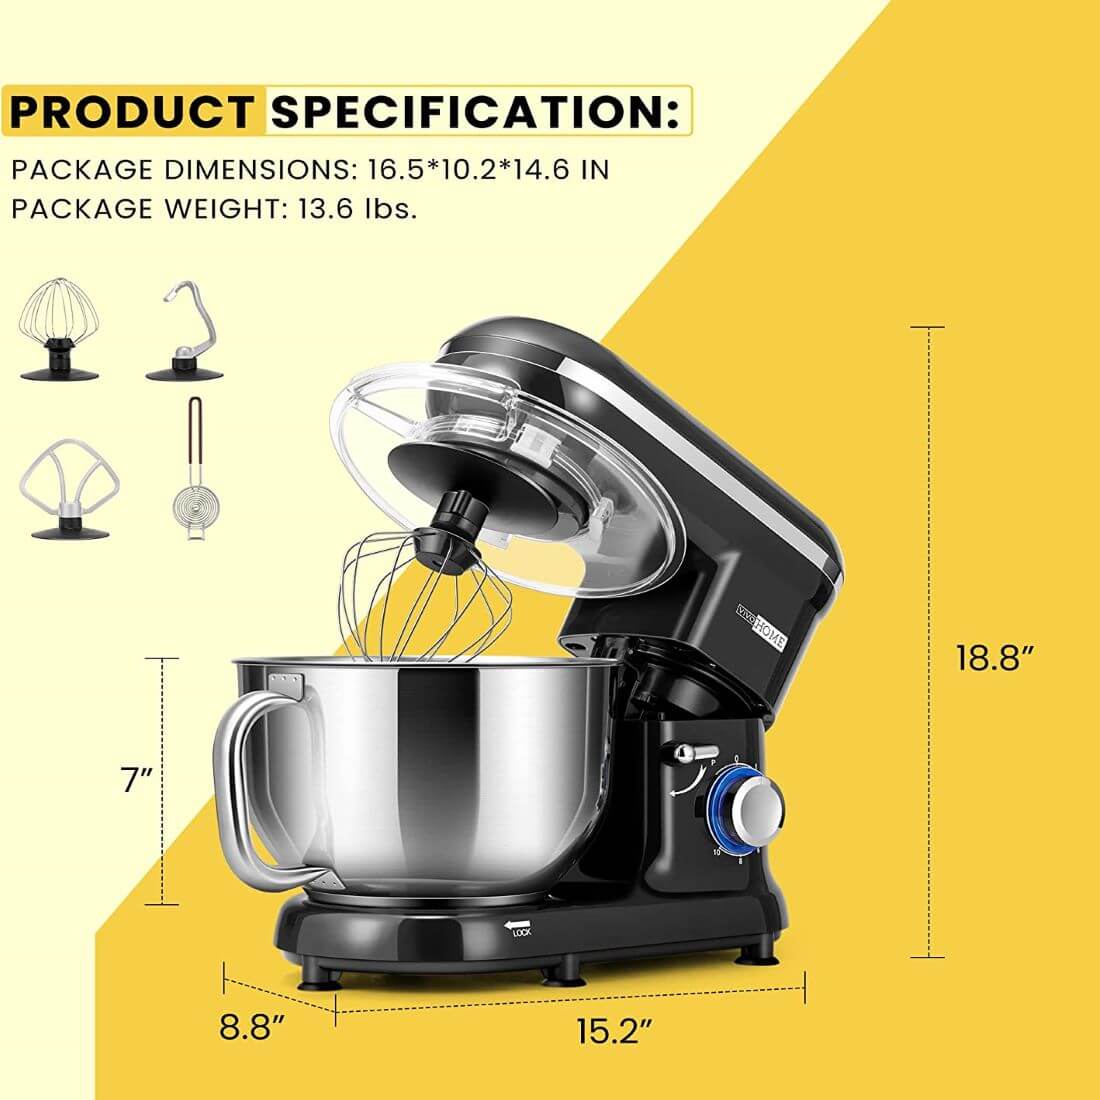 VIVOHOME Stand Mixer, 650W 6 Speed 6 Quart Tilt-Head Kitchen Electric Food Mixer with Beater, Dough Hook and Wire Whip, Black